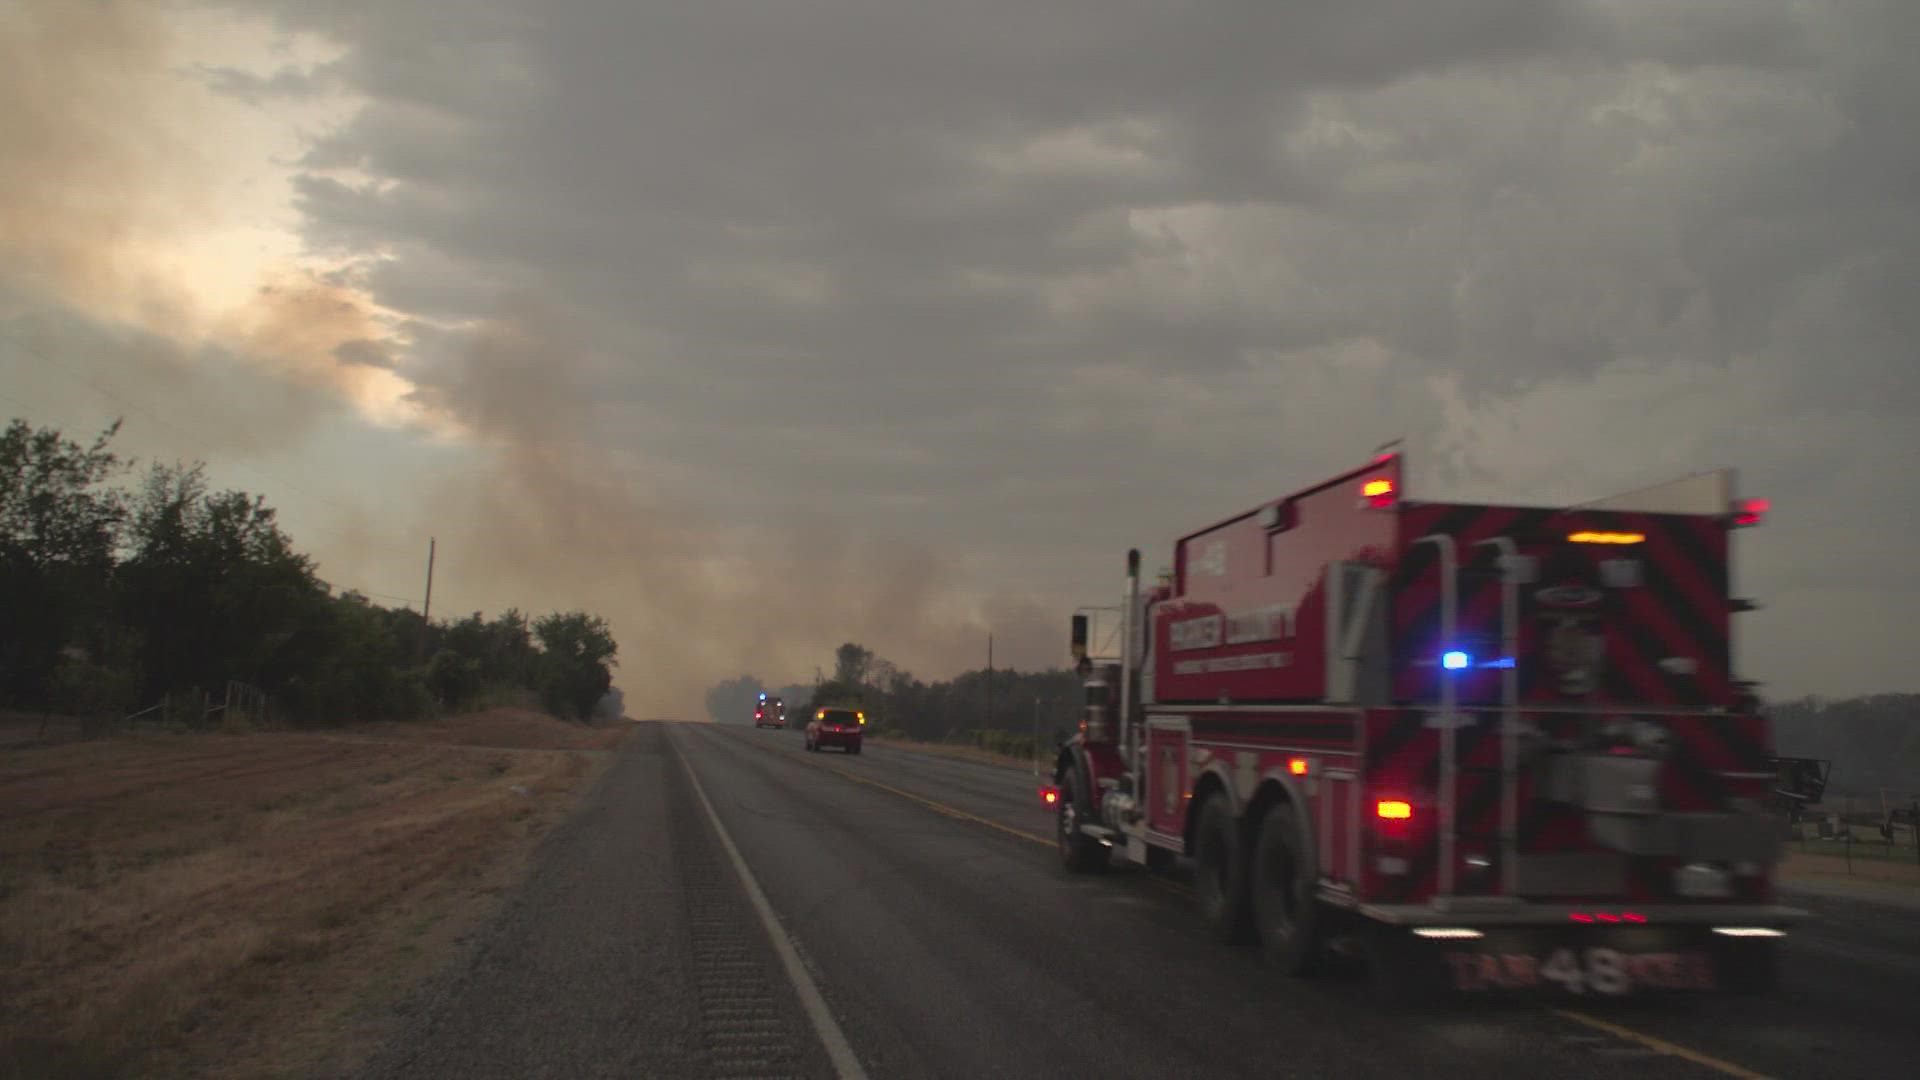 Firefighters welcome any rain but worry that lightning and wind could make conditions worse.